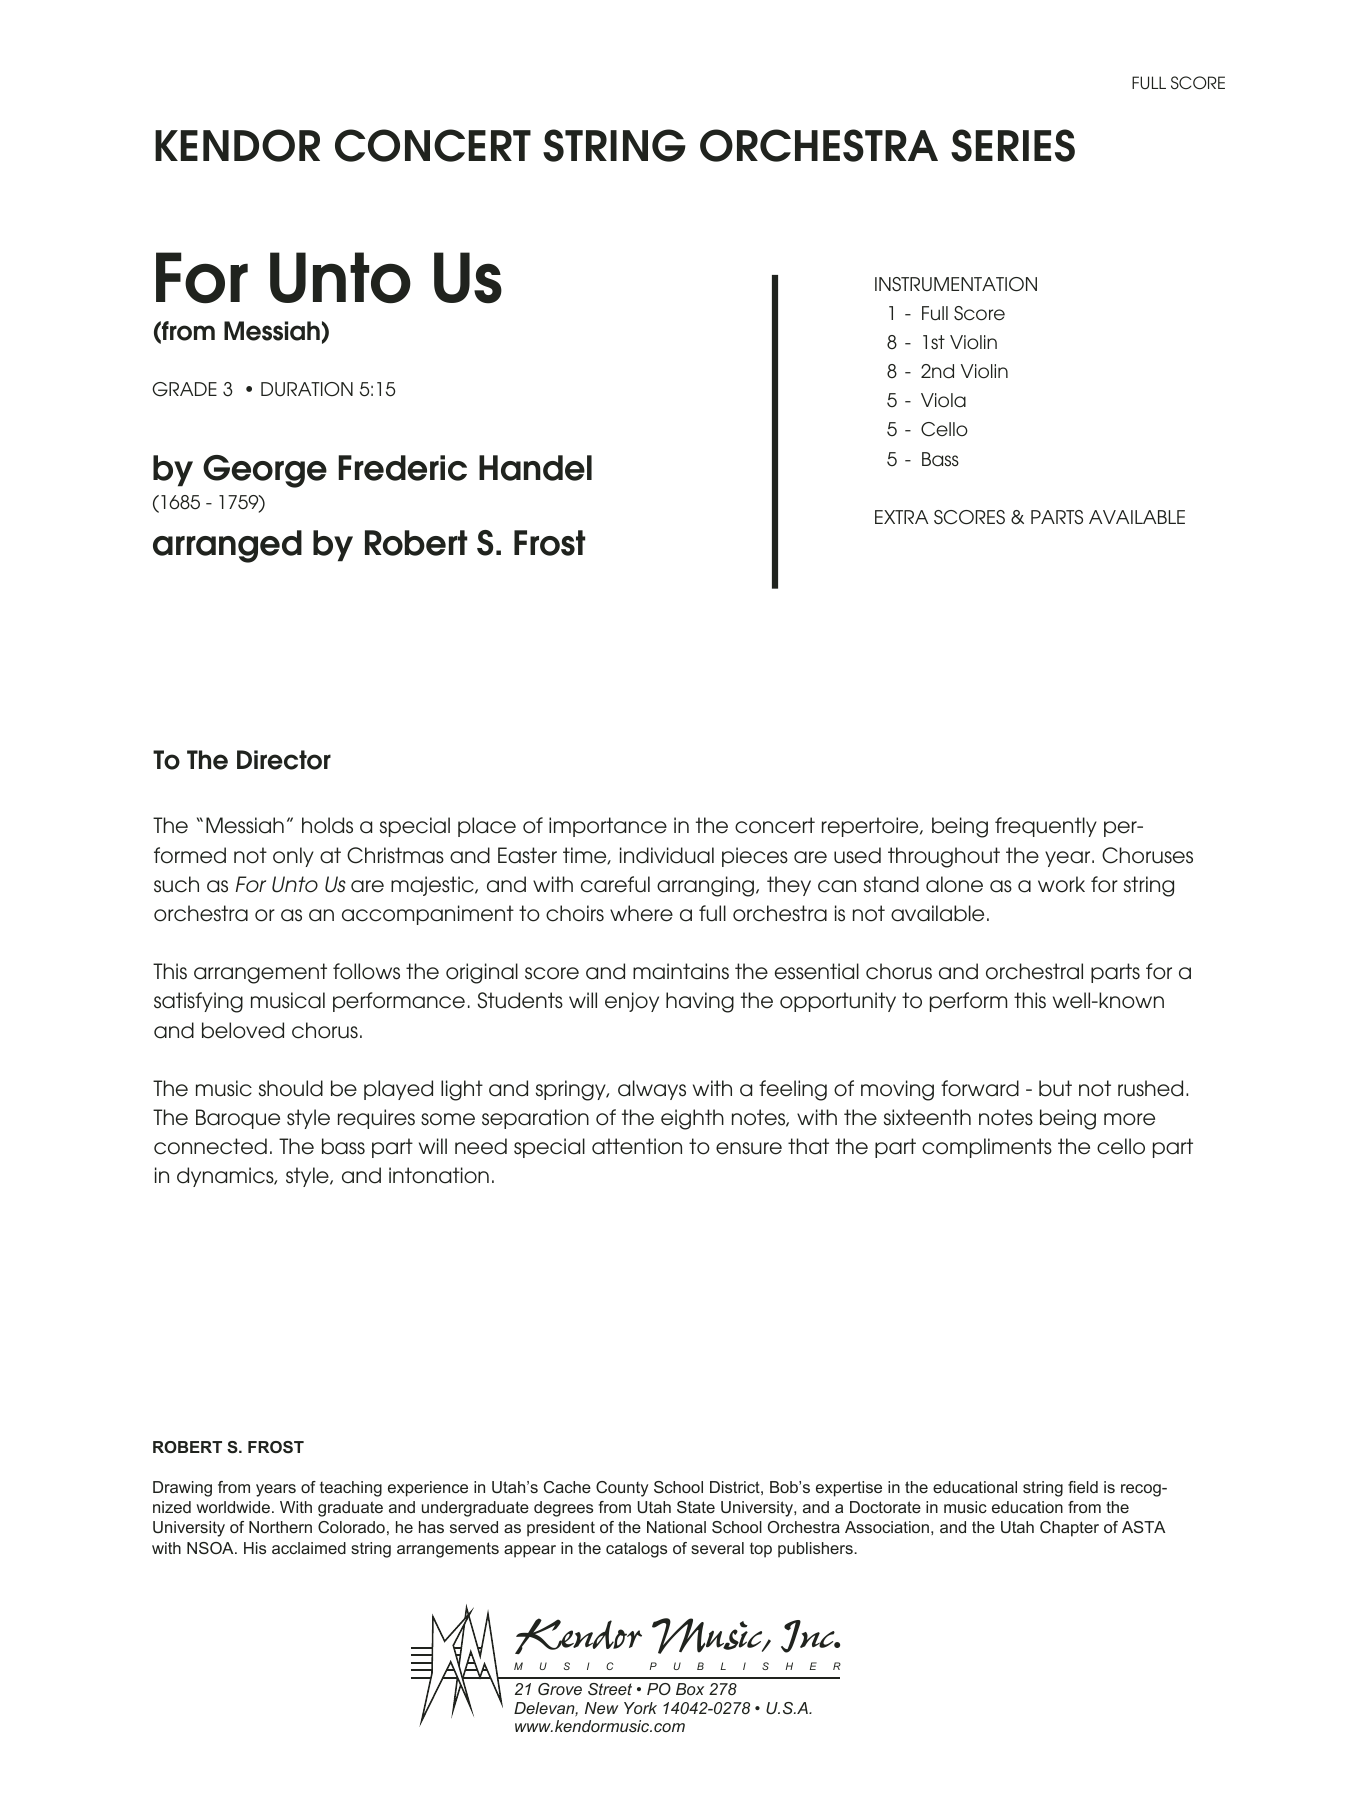 Download George Frideric Handel For Unto Us (from Messiah) - Full Score Sheet Music